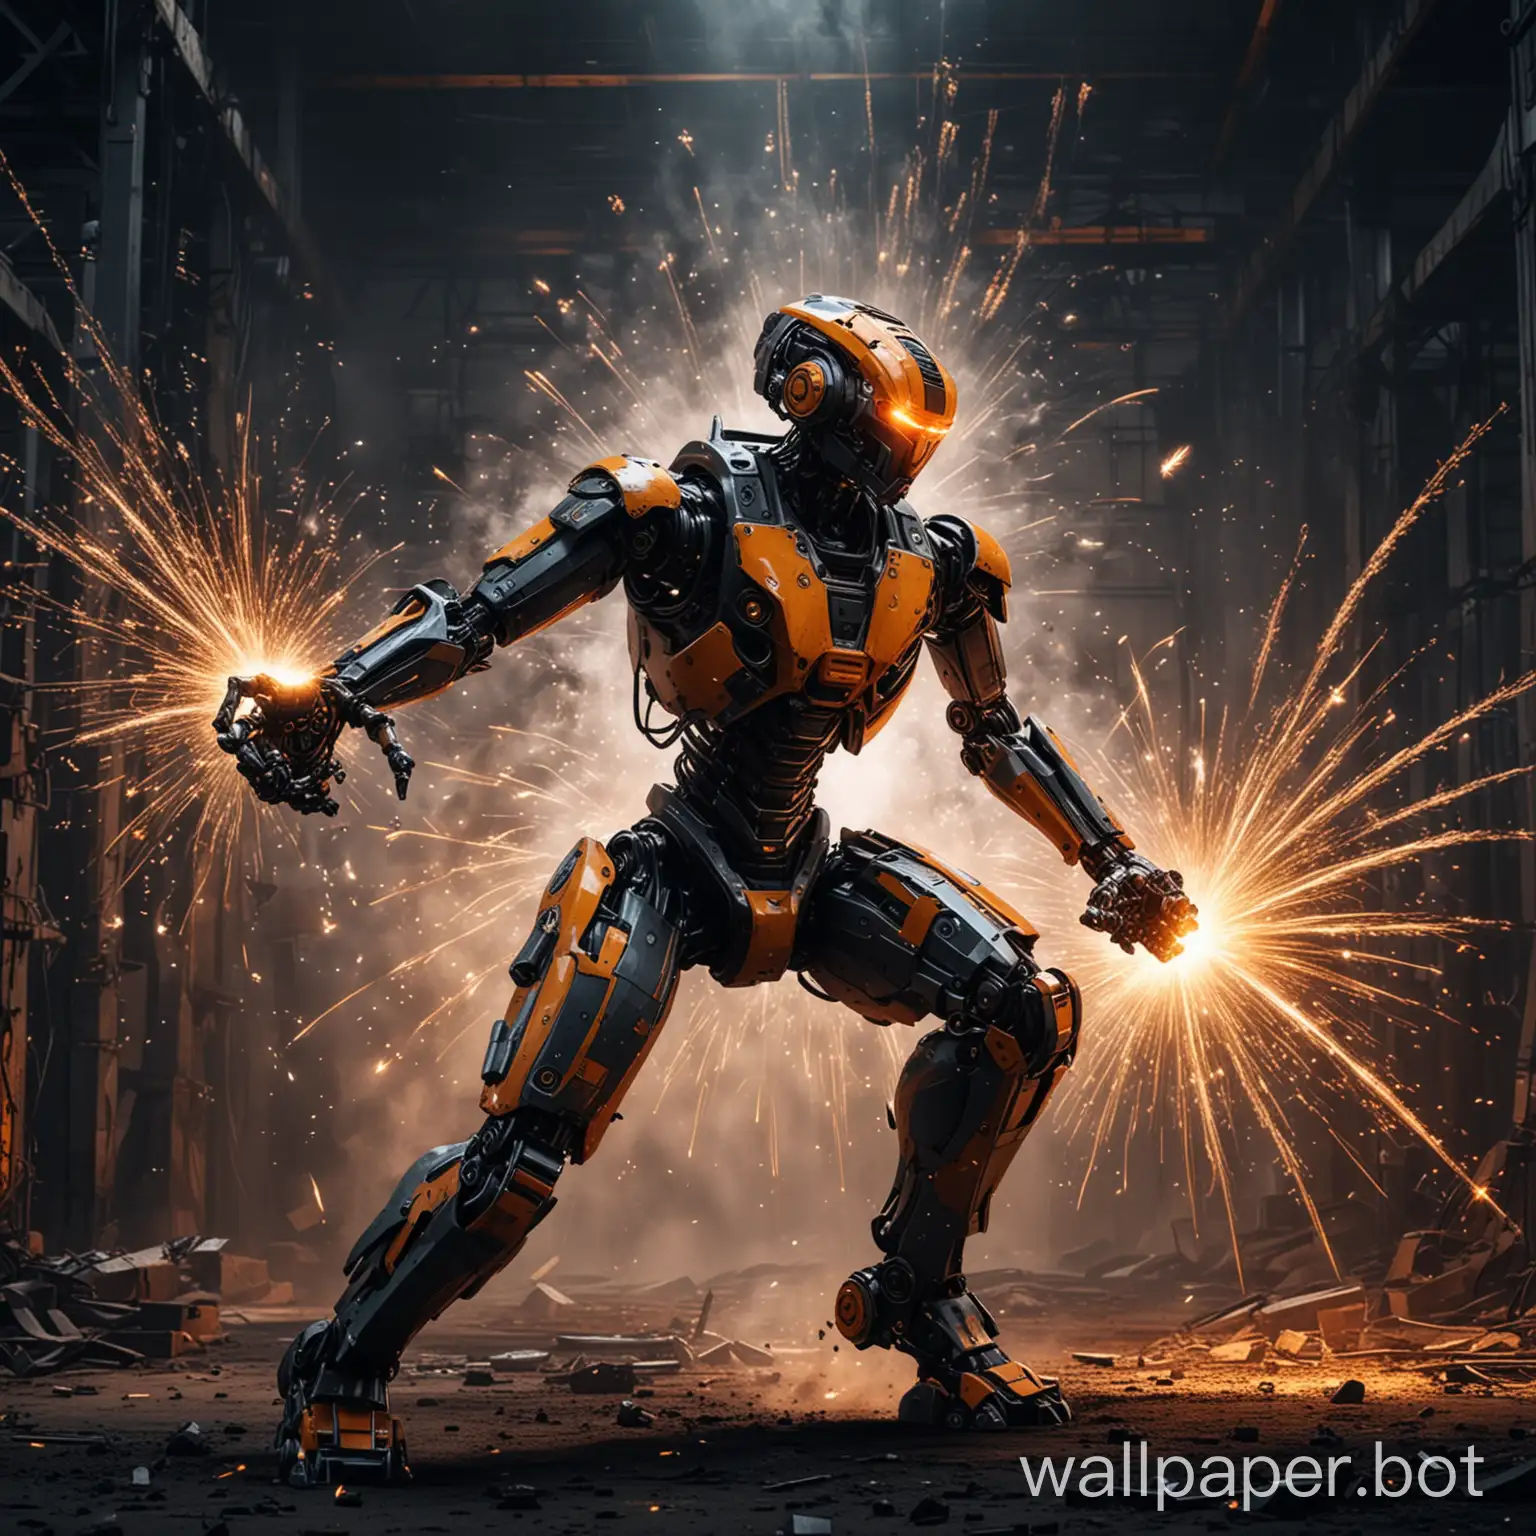 laser orange black style industrial with a robot AI in a epic pose combat with human half cyborg with in the background cutting and bending metal sheets and fireworks from metal